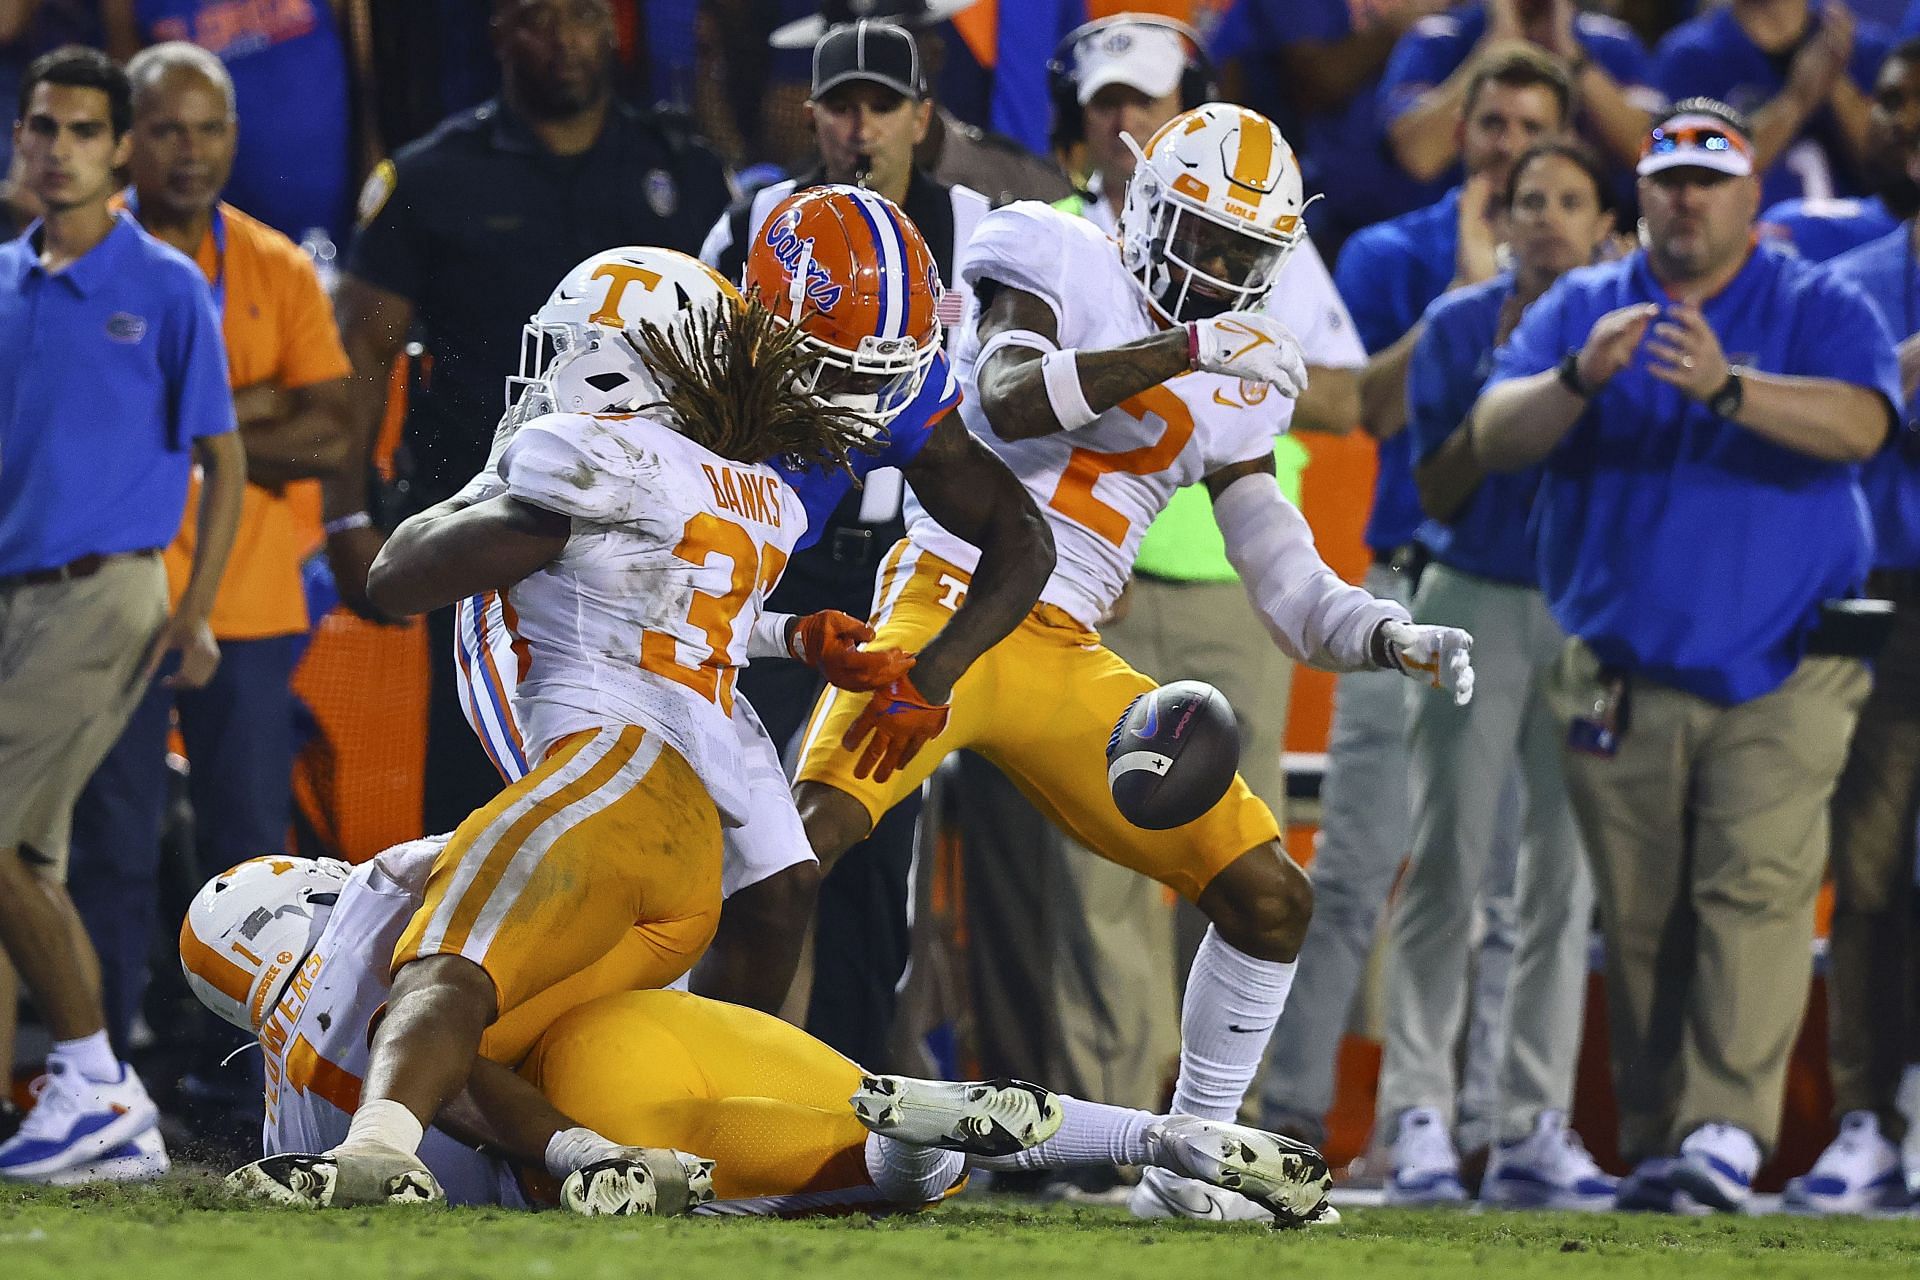 Jeremy Banks #33 of the Tennessee Volunteers forces a fumble against Jacob Copeland #1 of the Florida Gators